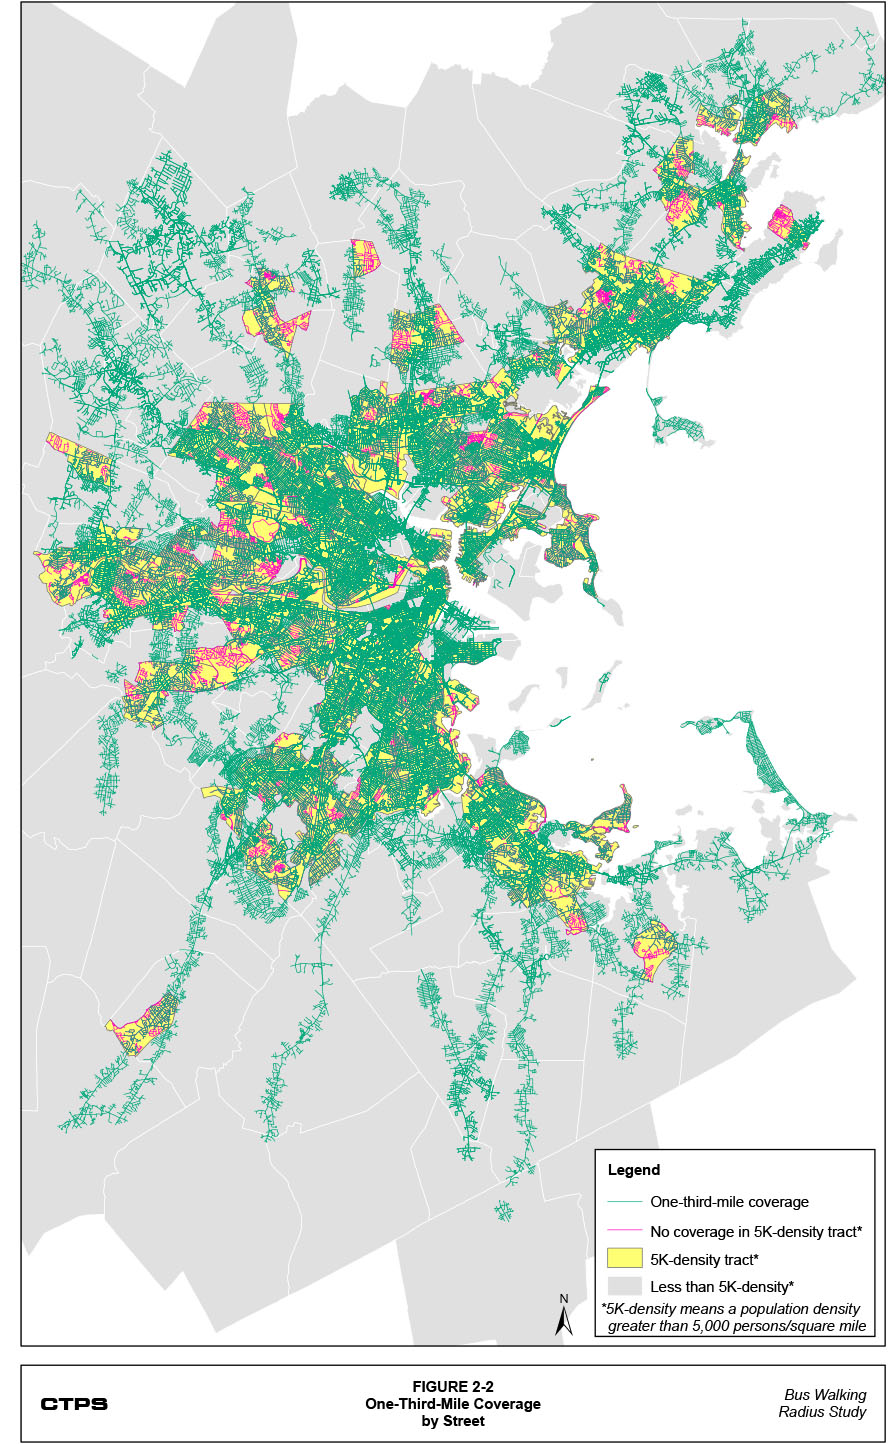 Figure 2-2: One-Third-Mile Coverage by Street. This is a map that shows two categories of street miles: 1) the street miles in the one-third-mile coverage for the entire MBTA bus and rapid transit systems; and 2) the street miles within census tracts with a population density greater than 5,000 persons per square mile. The map also shows where these two categories of street miles do and do not overlap.